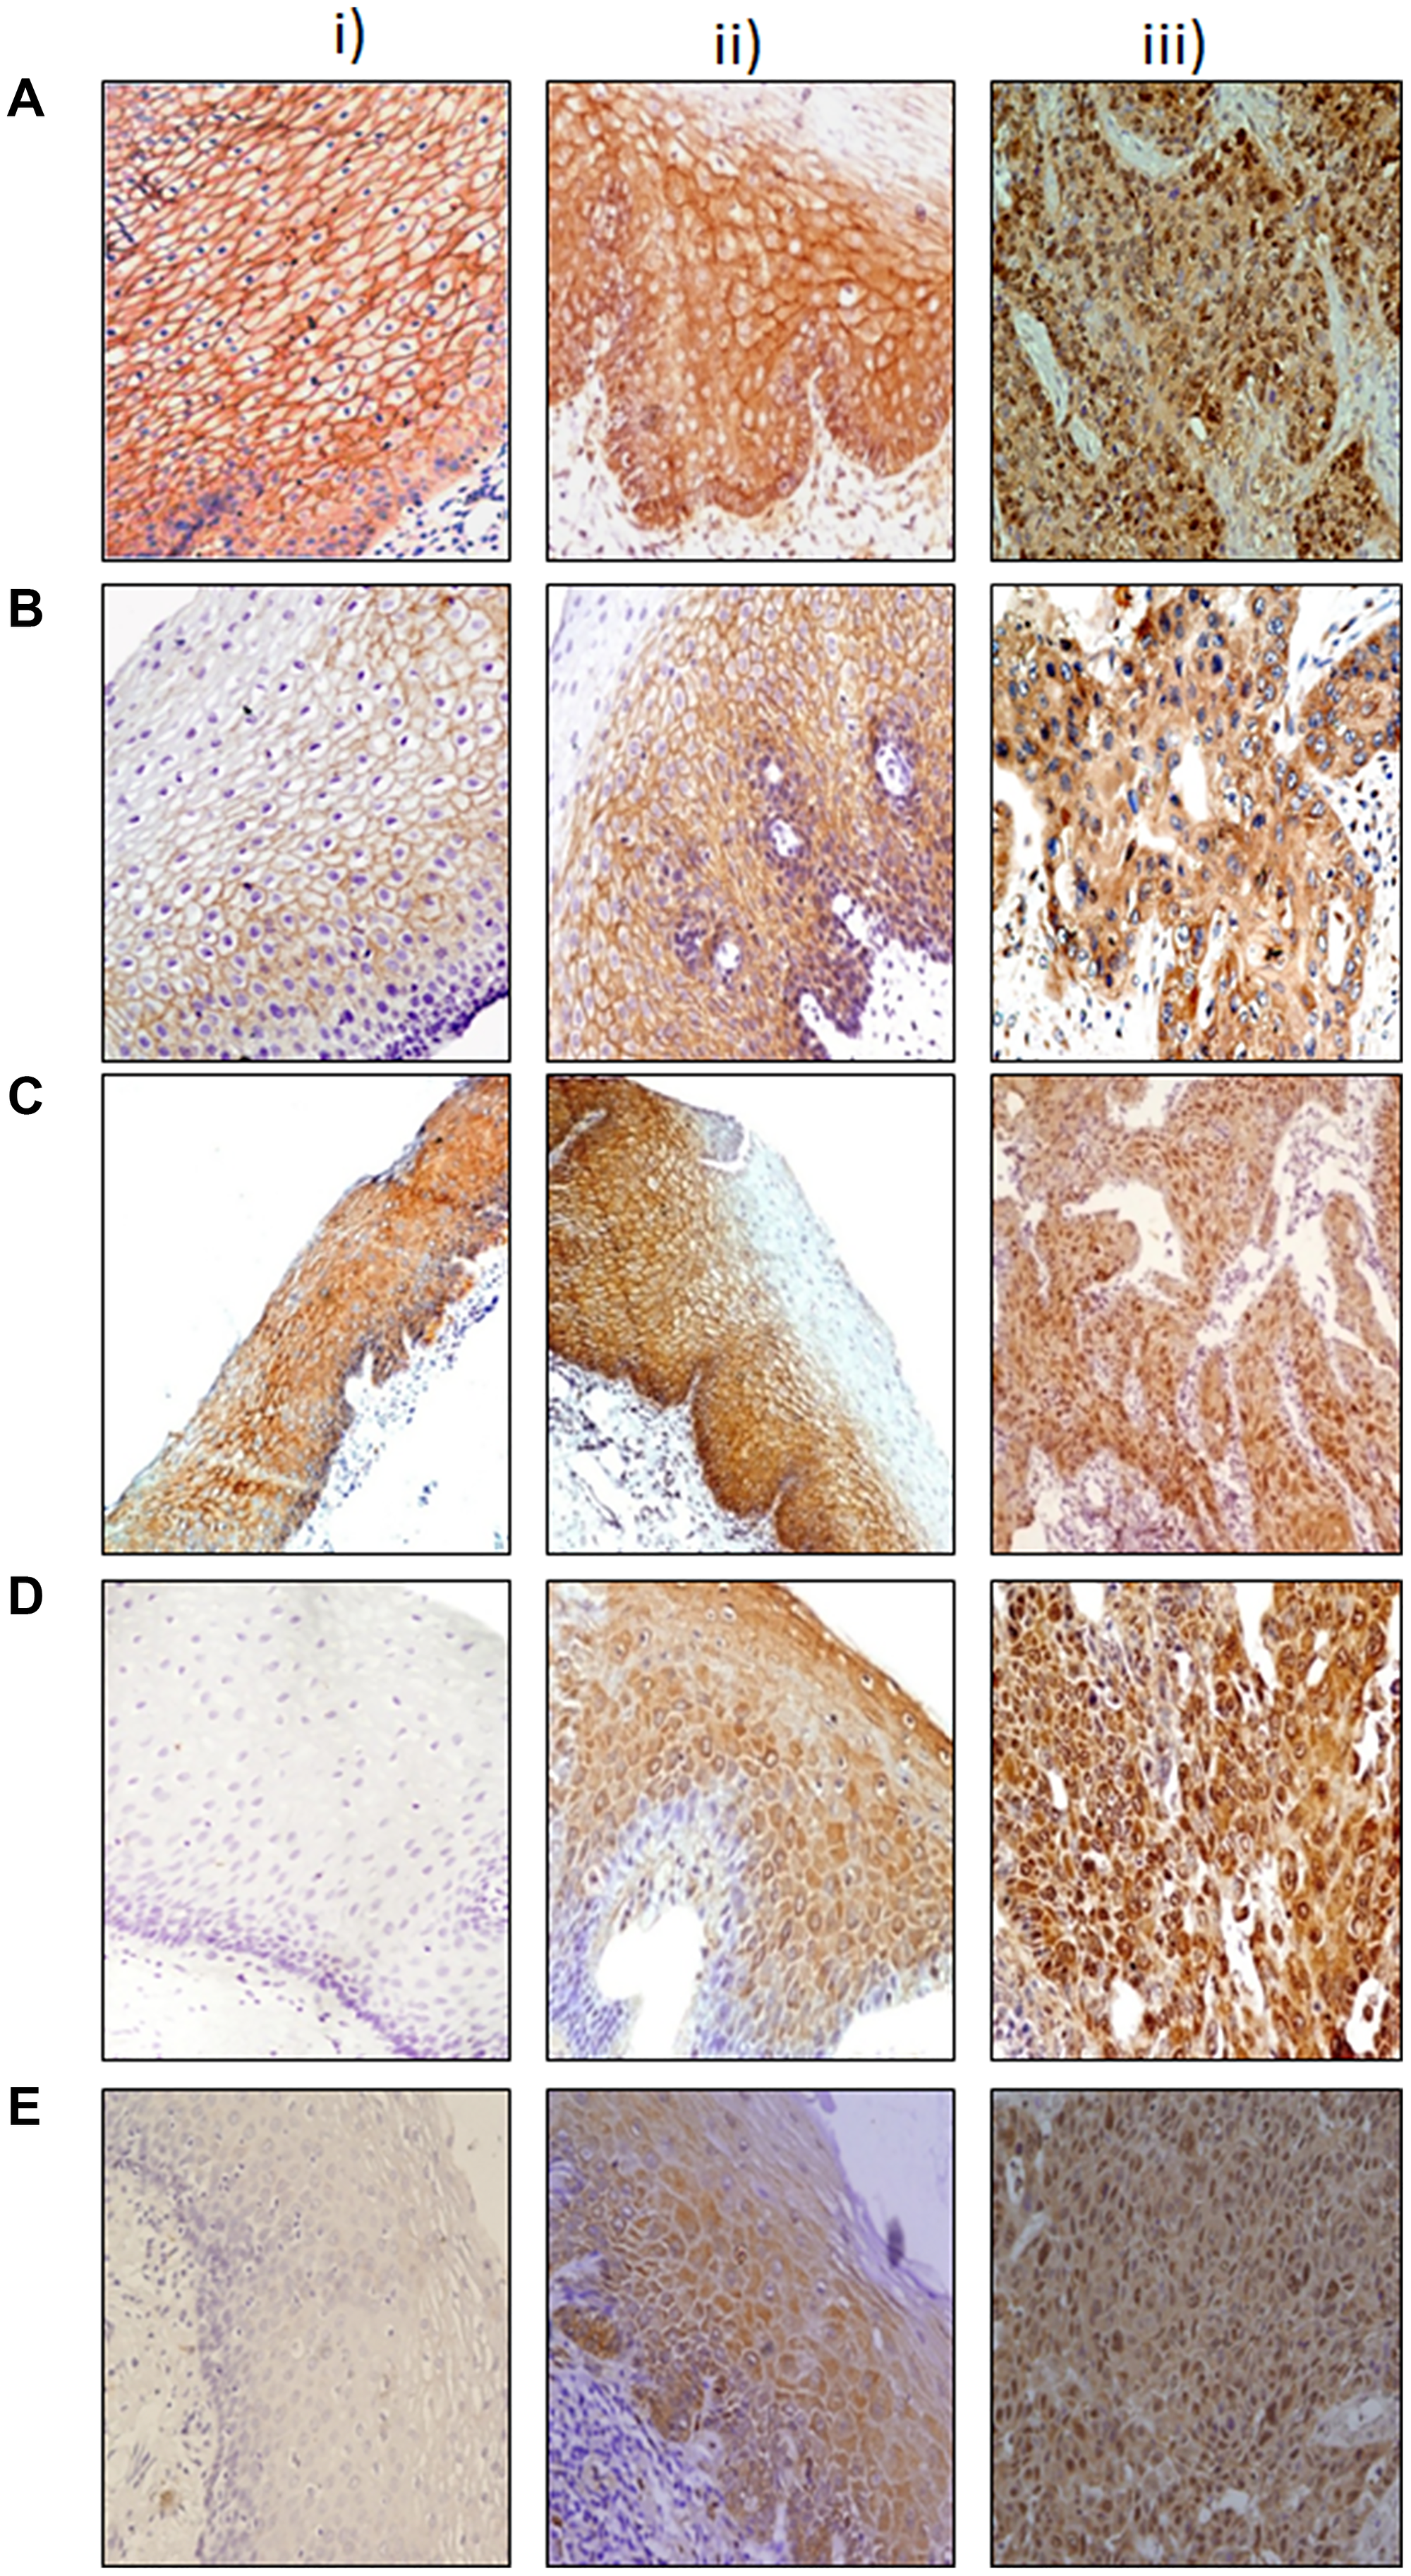 Immunohistochemical analysis of Wnt protein in esophageal tissues.